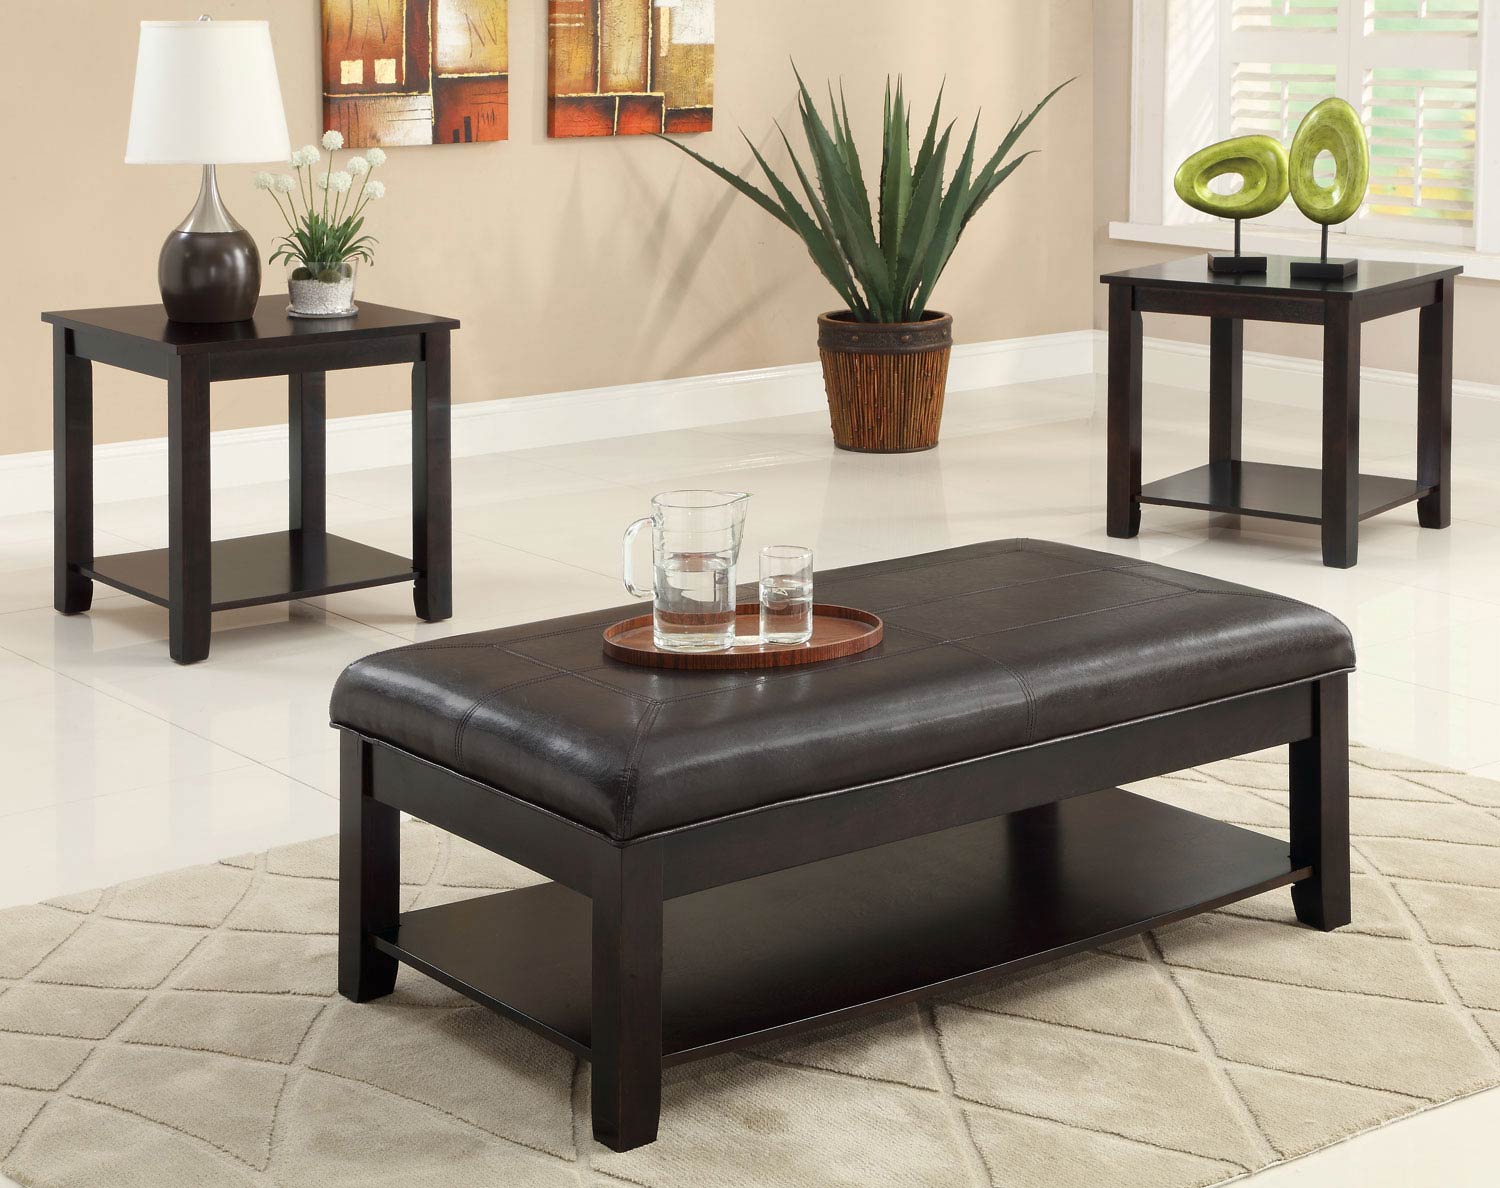 Coaster 701601 3 Pack Coffee Table Set - Cappuccino